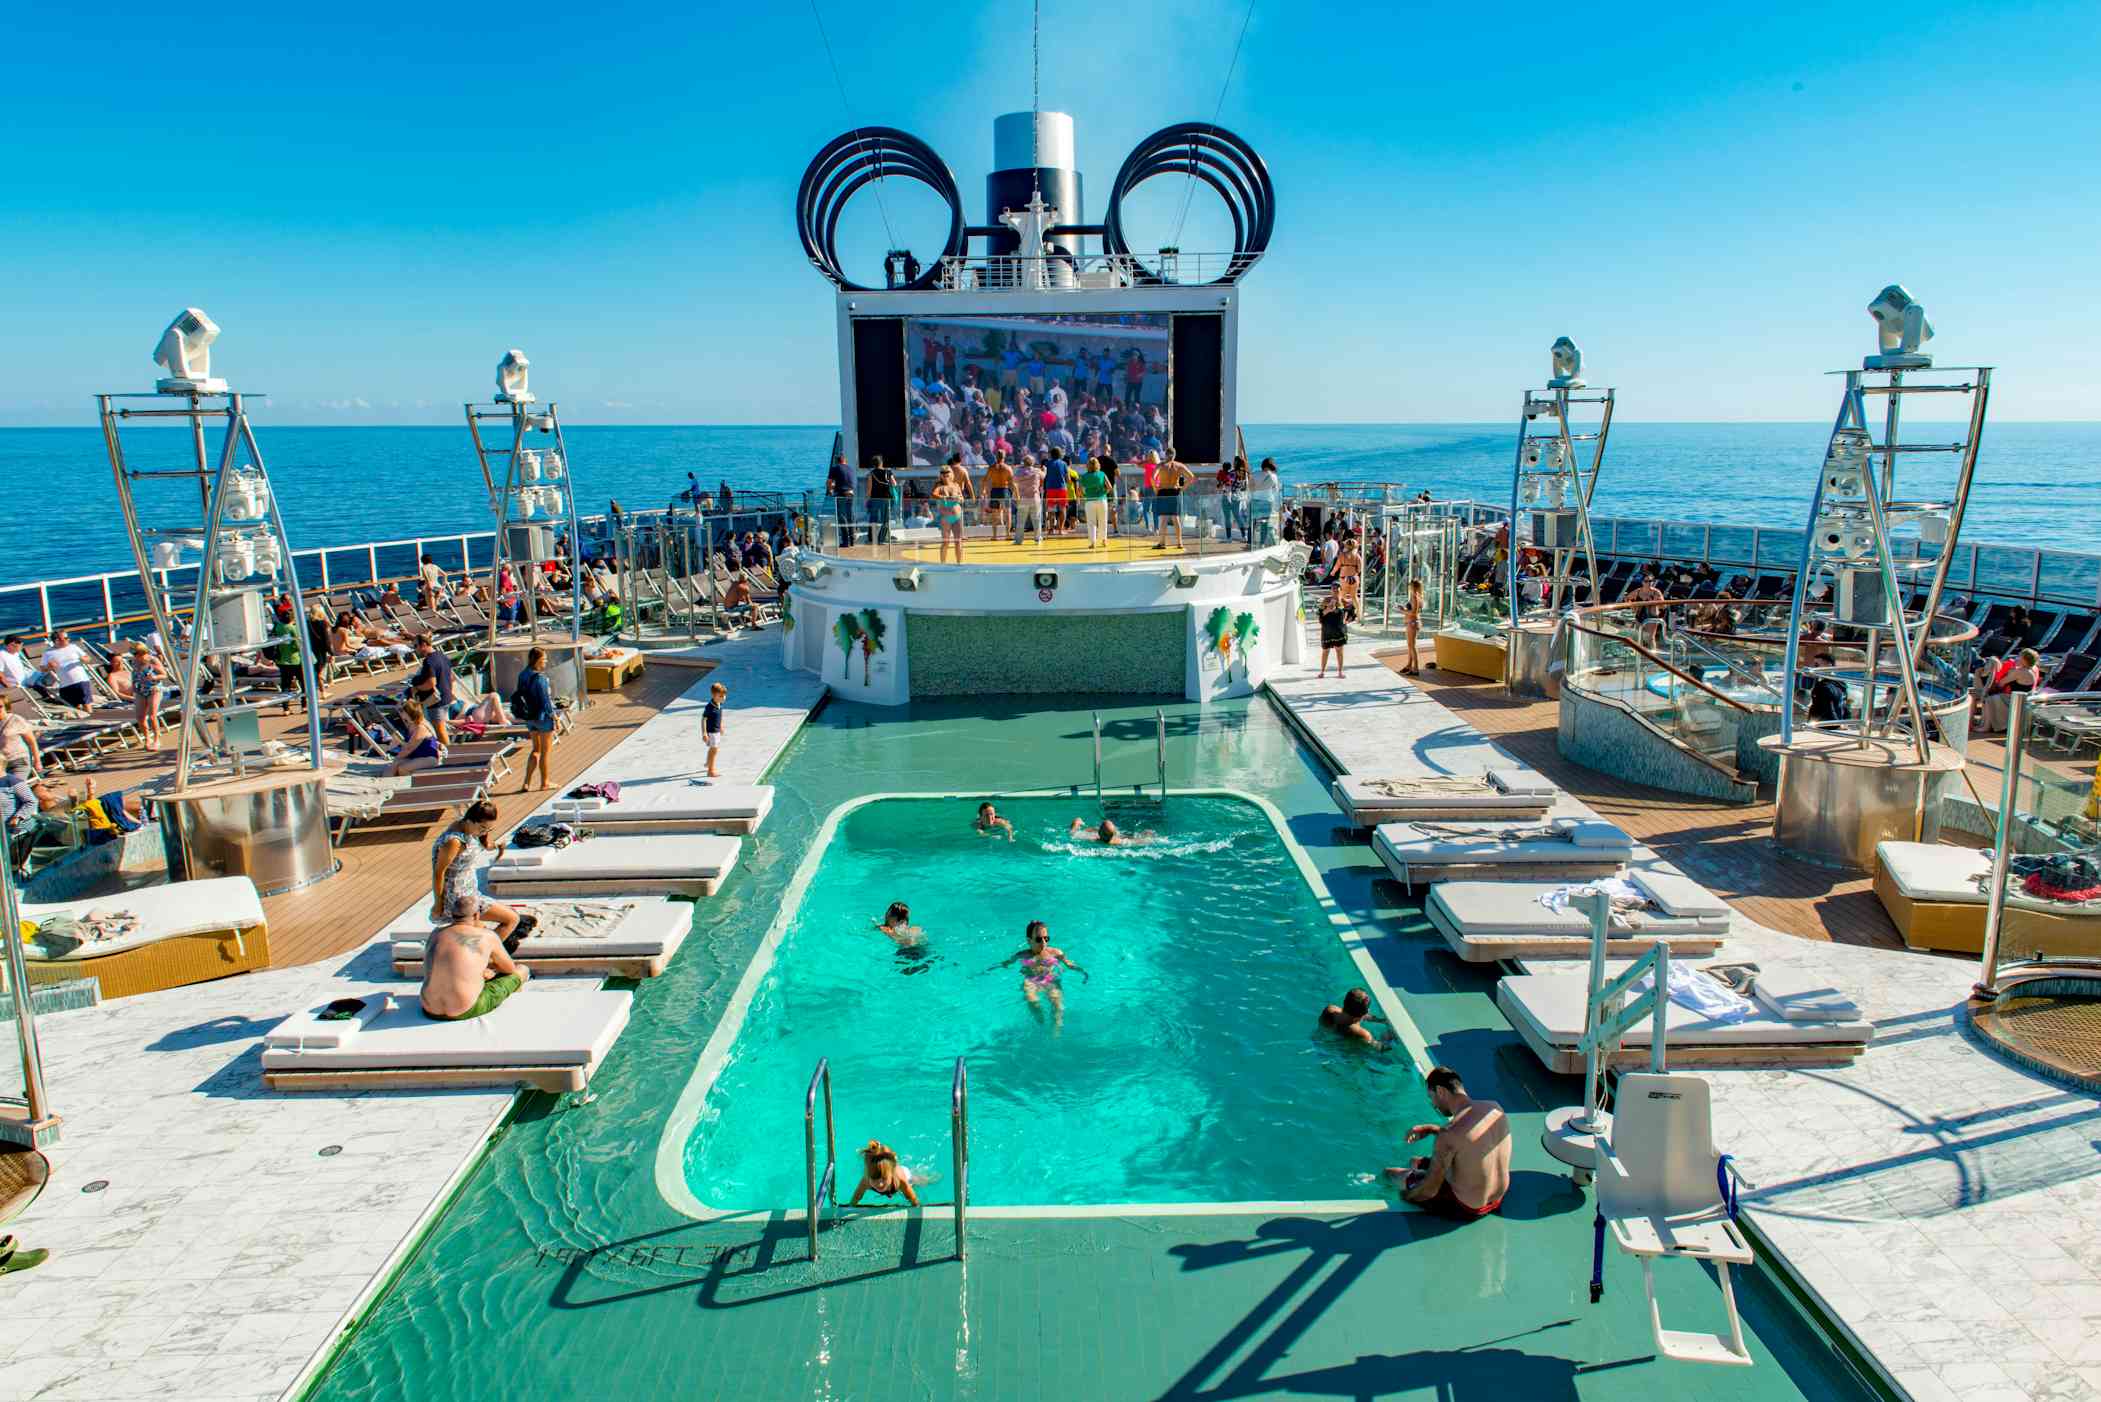 Pools, Take a Dip in the Onboard Pools